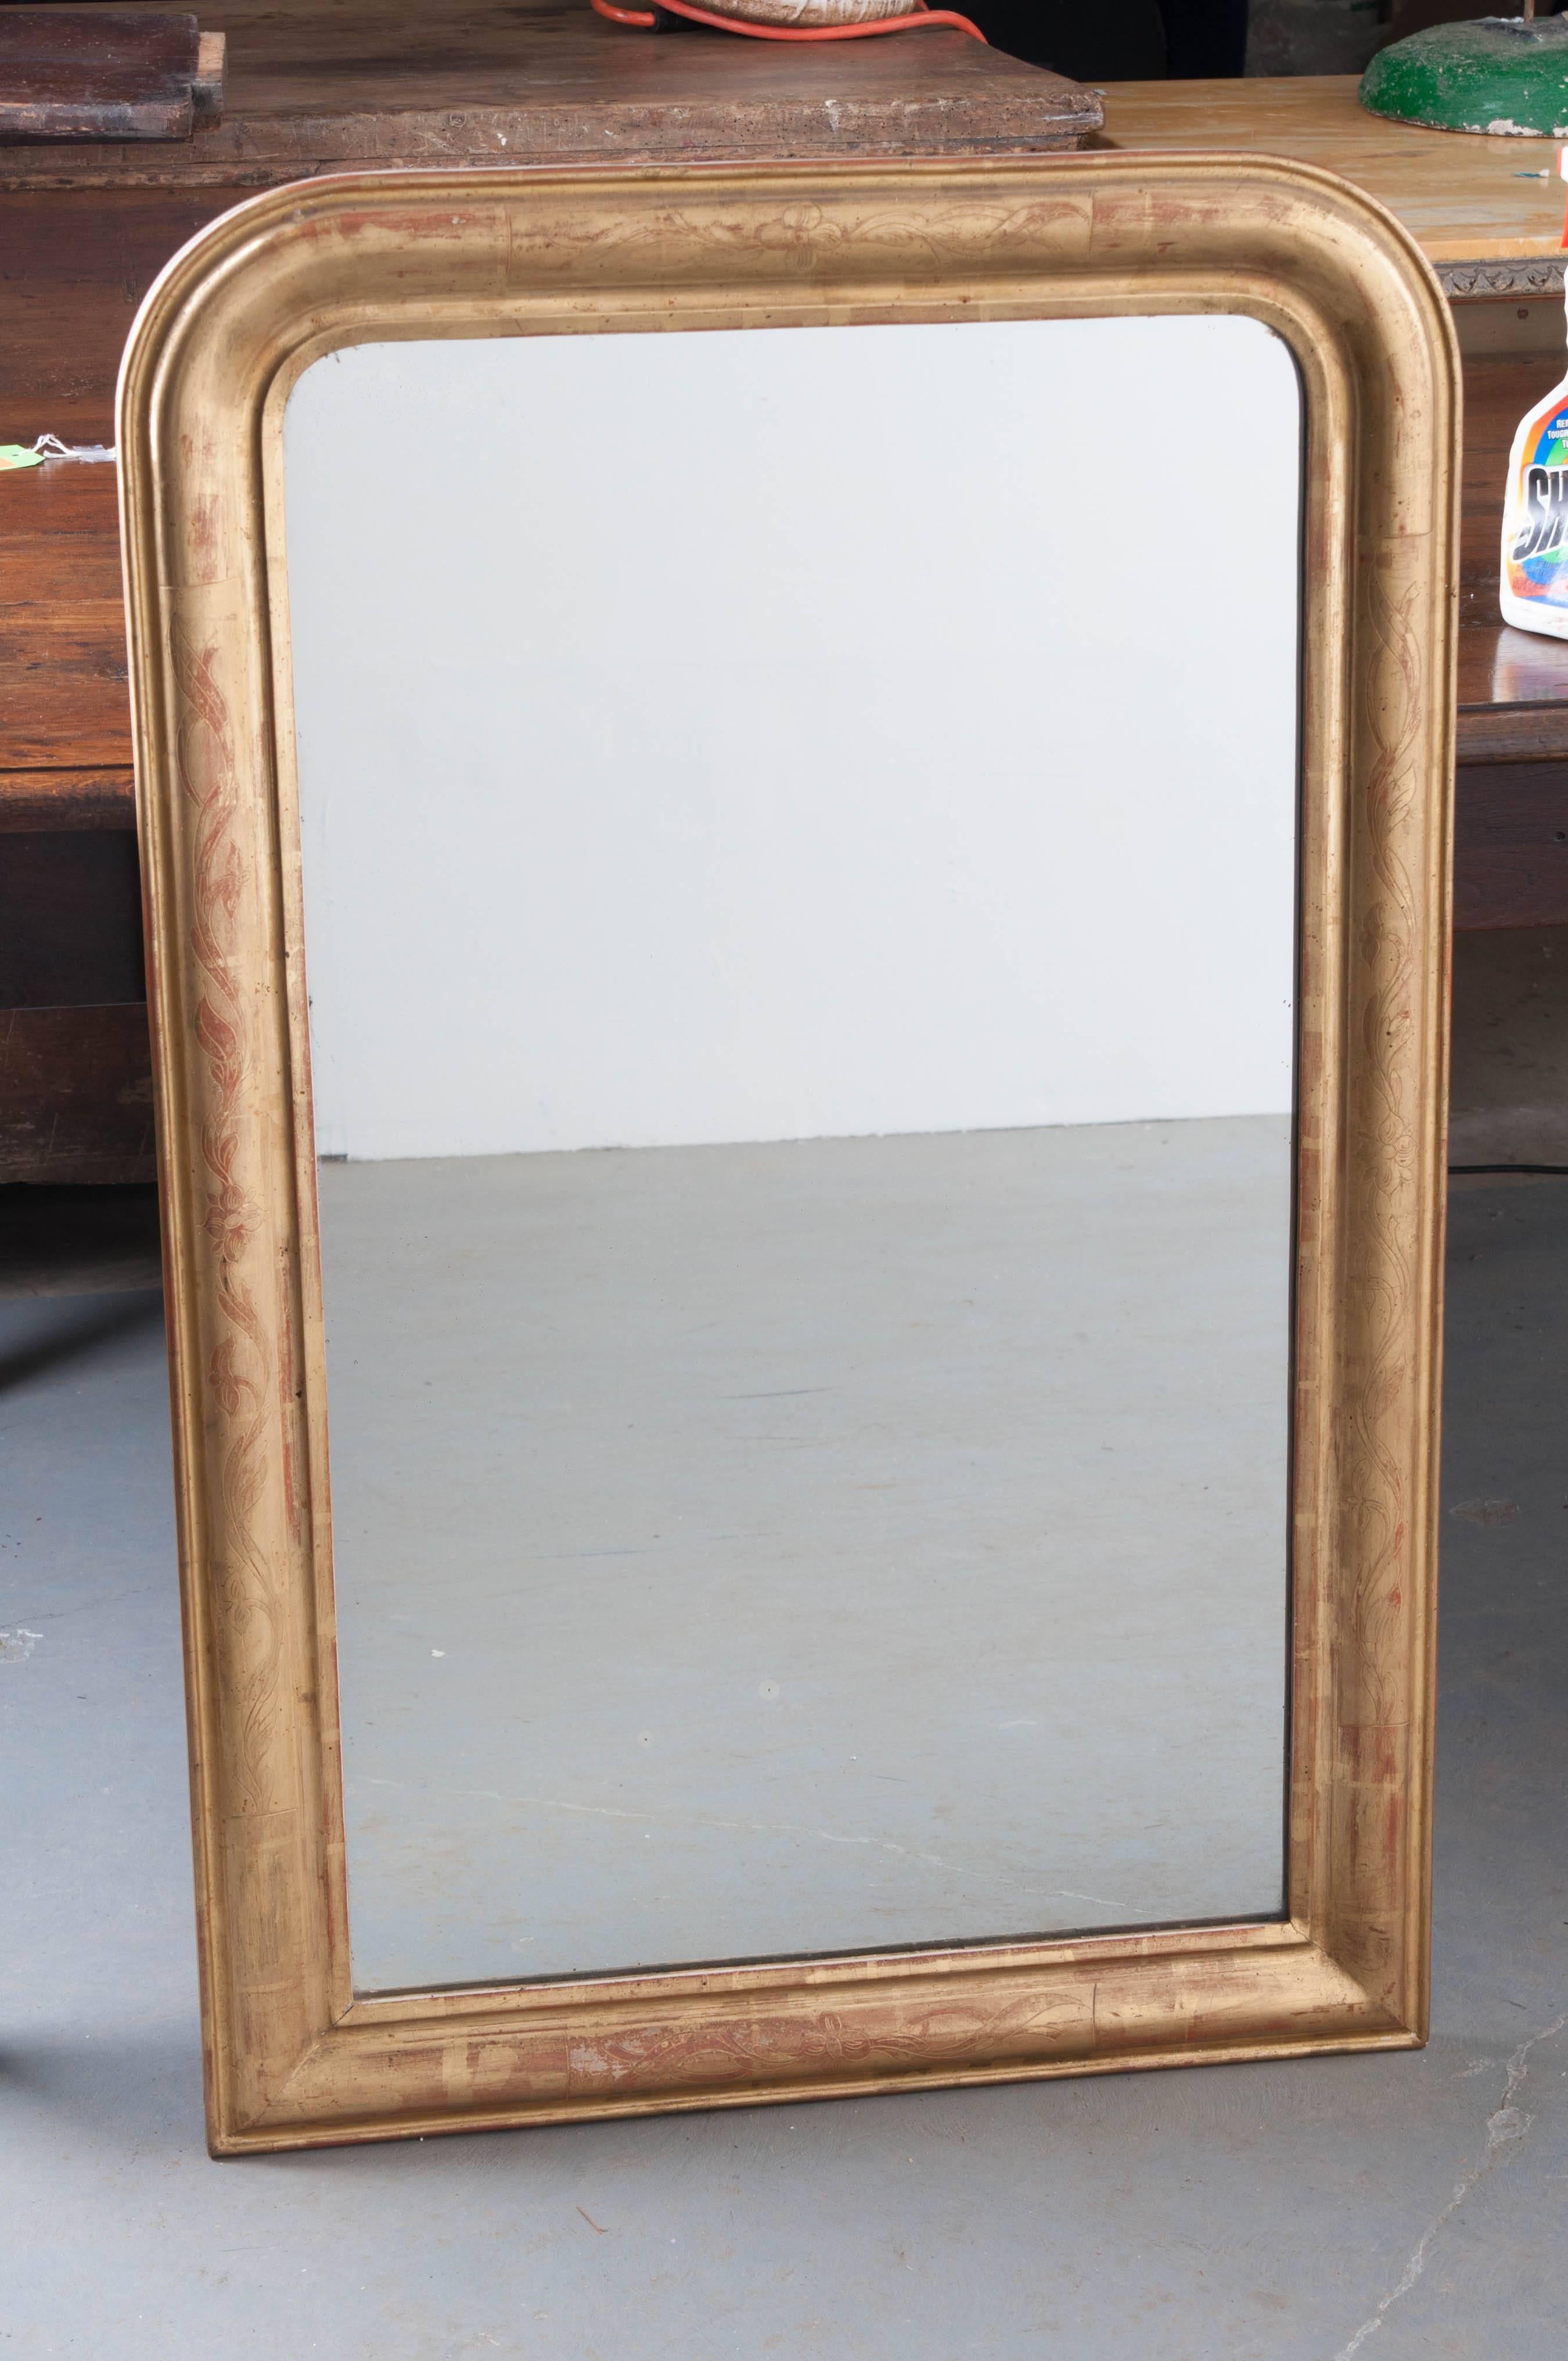 This fantastic, purely Louis Philippe gold gilt mirror was made circa 1870 in France. Radiant gold gilt engulfs the frame, with just the right amount of the red, bole substratum visible about the mirror. The gilt work is garnished with flowering